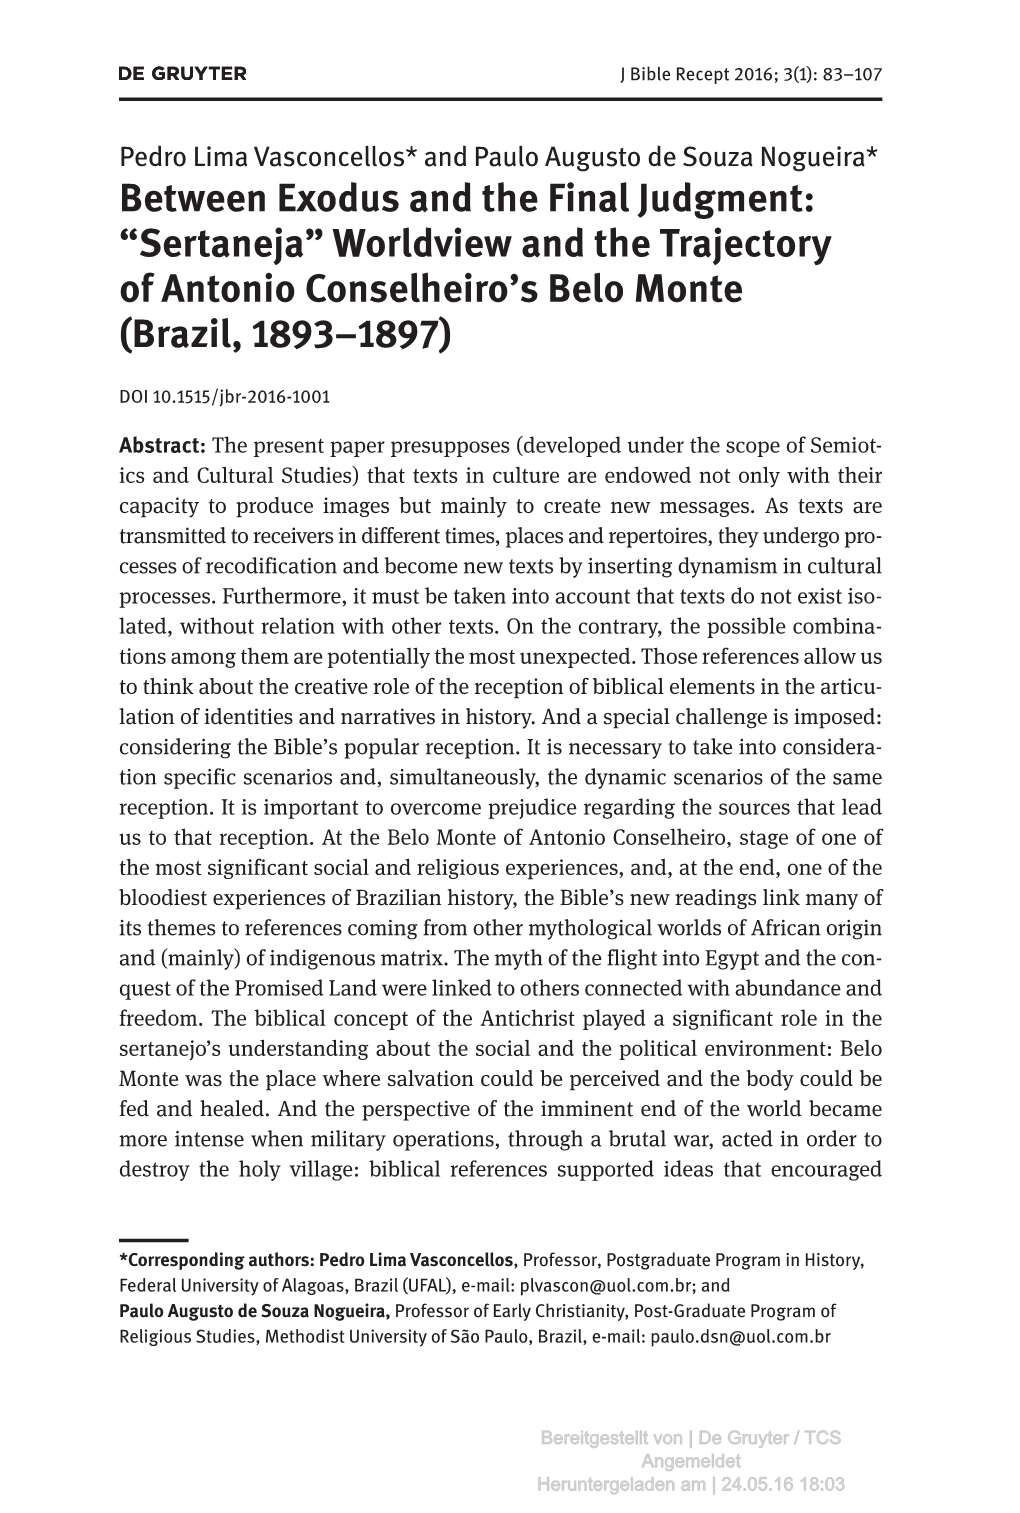 Between Exodus and the Final Judgment: “Sertaneja” Worldview and the Trajectory of Antonio Conselheiro’S Belo Monte (Brazil, 1893–1897)